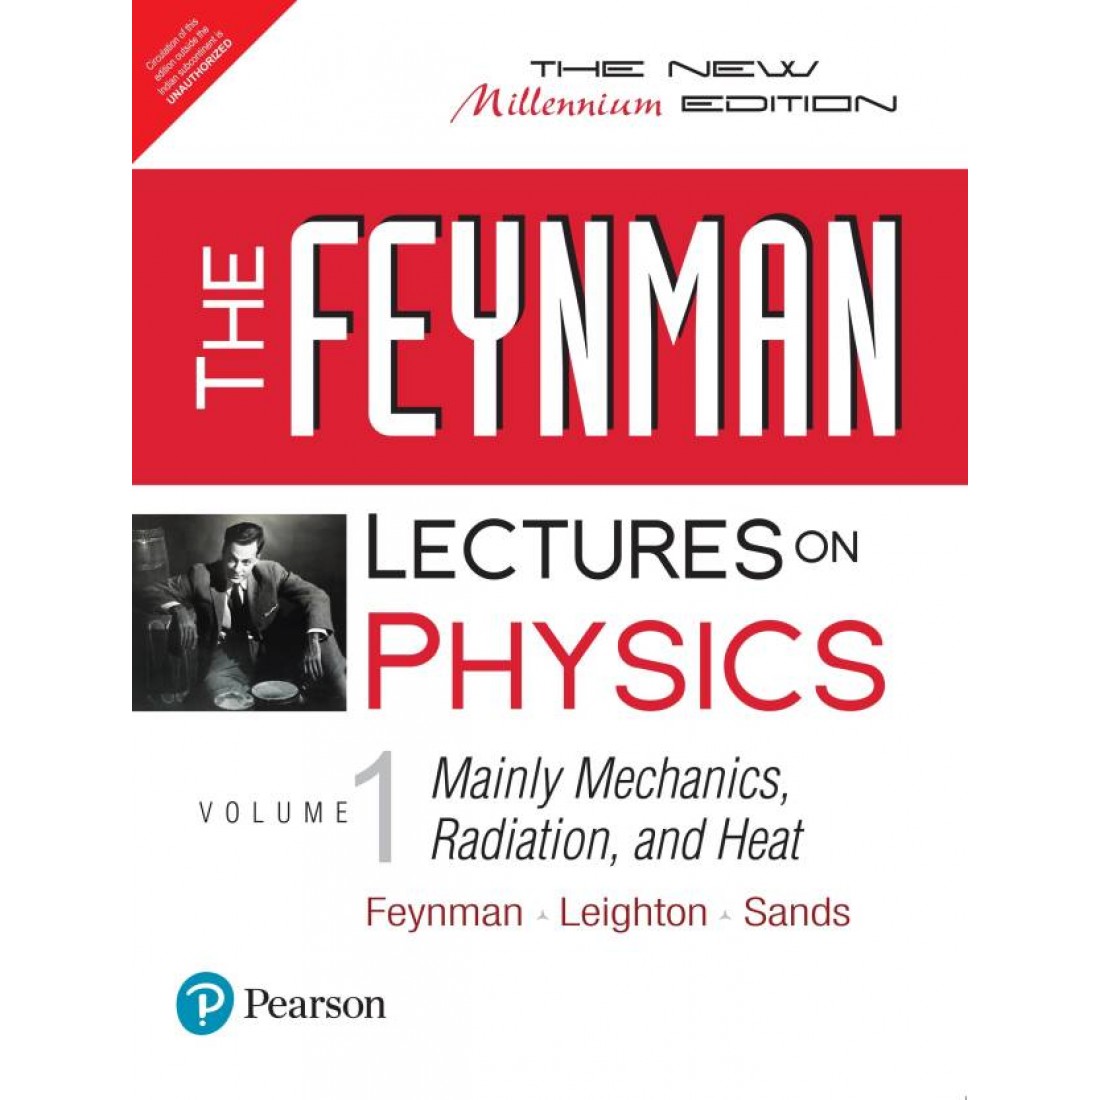 feynman lectures online